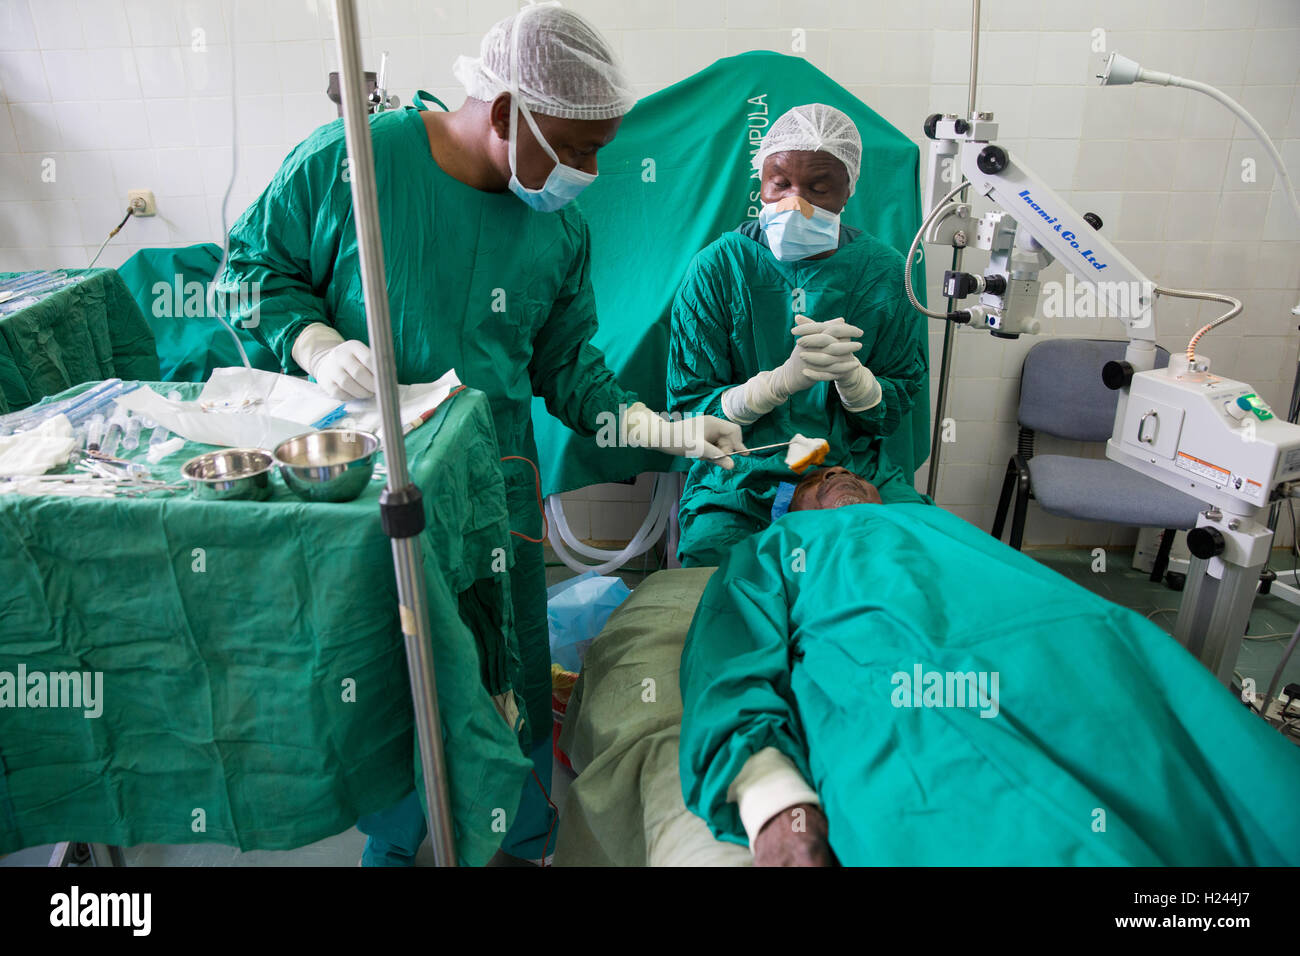 Ribaue Hospital, Ribaue,  Nampula Province, Mozambique, August 2015.  Ophthamologist Dr Anselmo Vilanculo and his team in the operating theatre perform eye surgery to remove cataracts from patients identified by outreach team screening.   Photo by Mike Goldwater Stock Photo